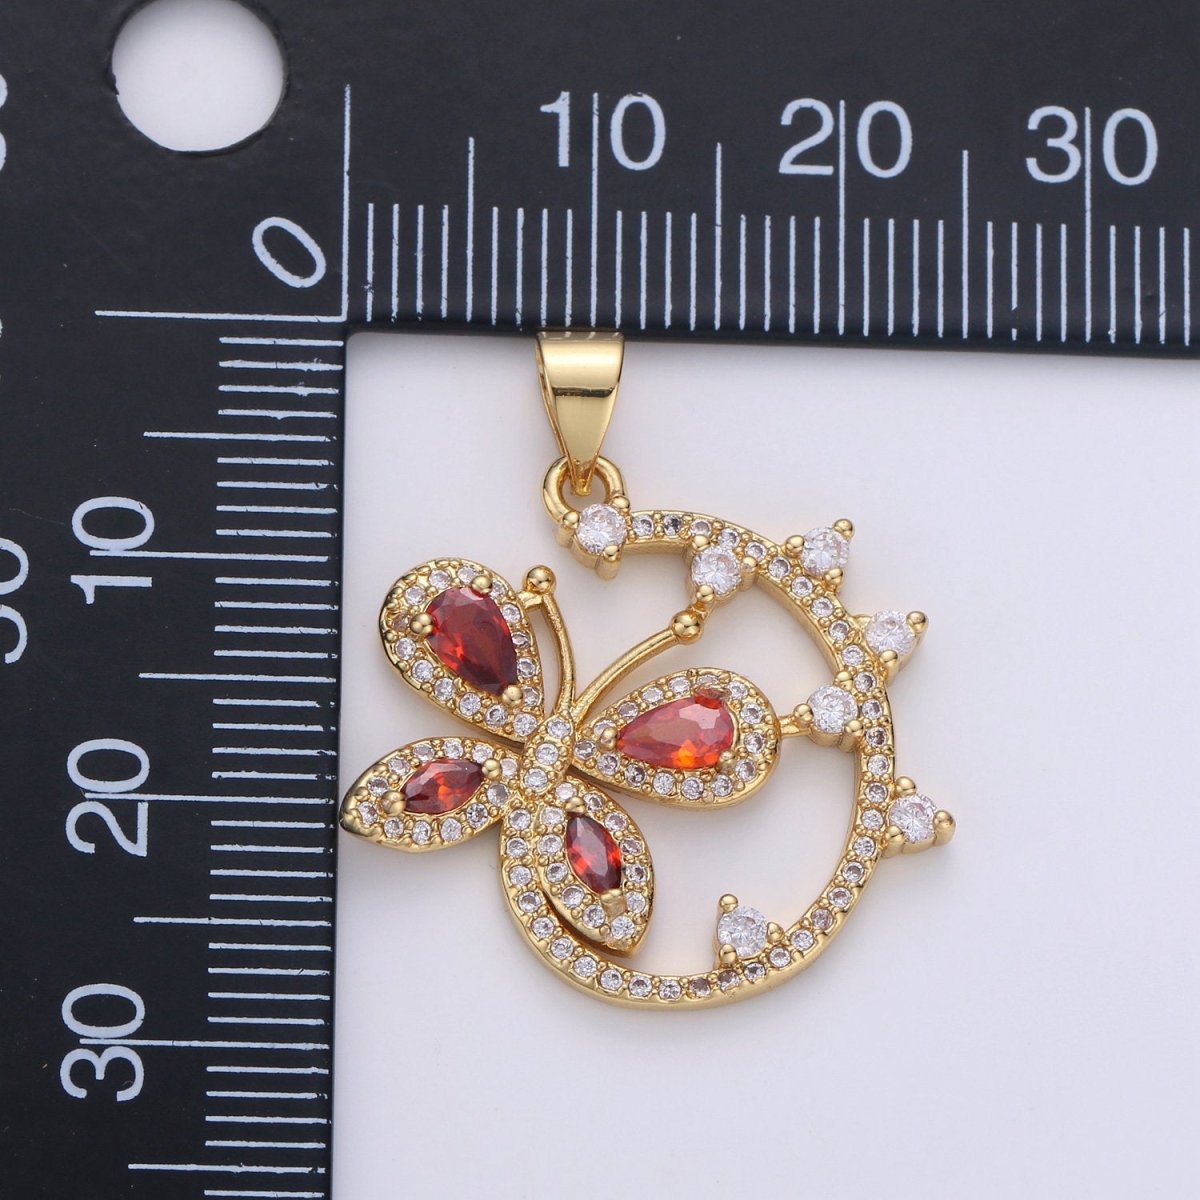 Dainty 24k Gold Filled Micro Pave Butterfly Charm, Ruby Cubic Zirconia Round Circle Pendant Charm, Gold Filled Charm, For DIY Jewelry I-852 - DLUXCA